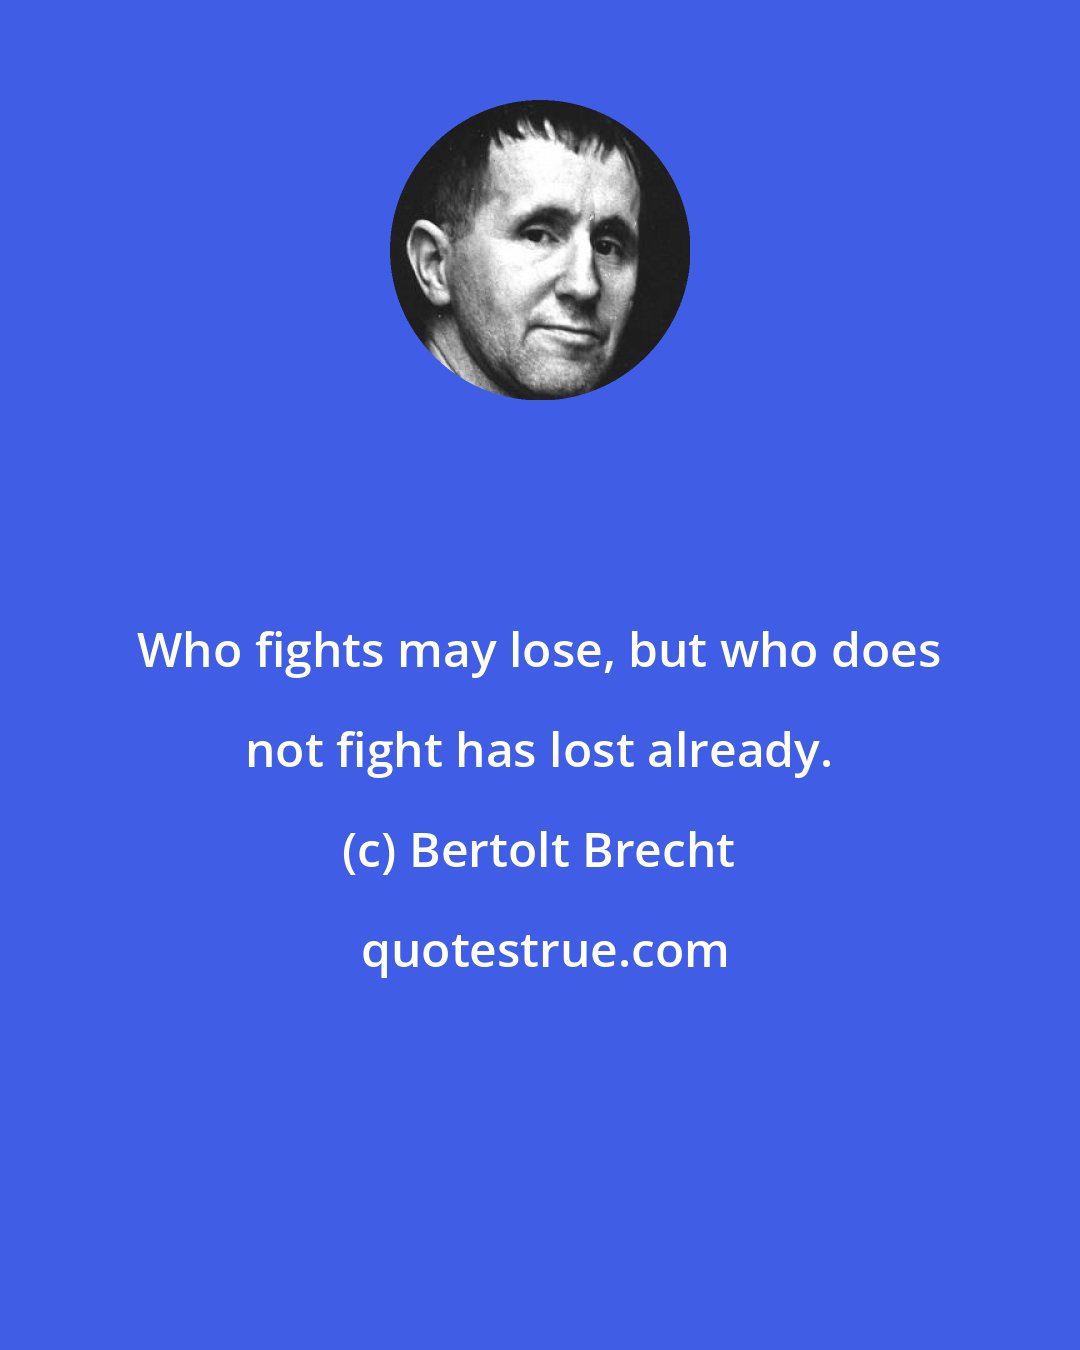 Bertolt Brecht: Who fights may lose, but who does not fight has lost already.